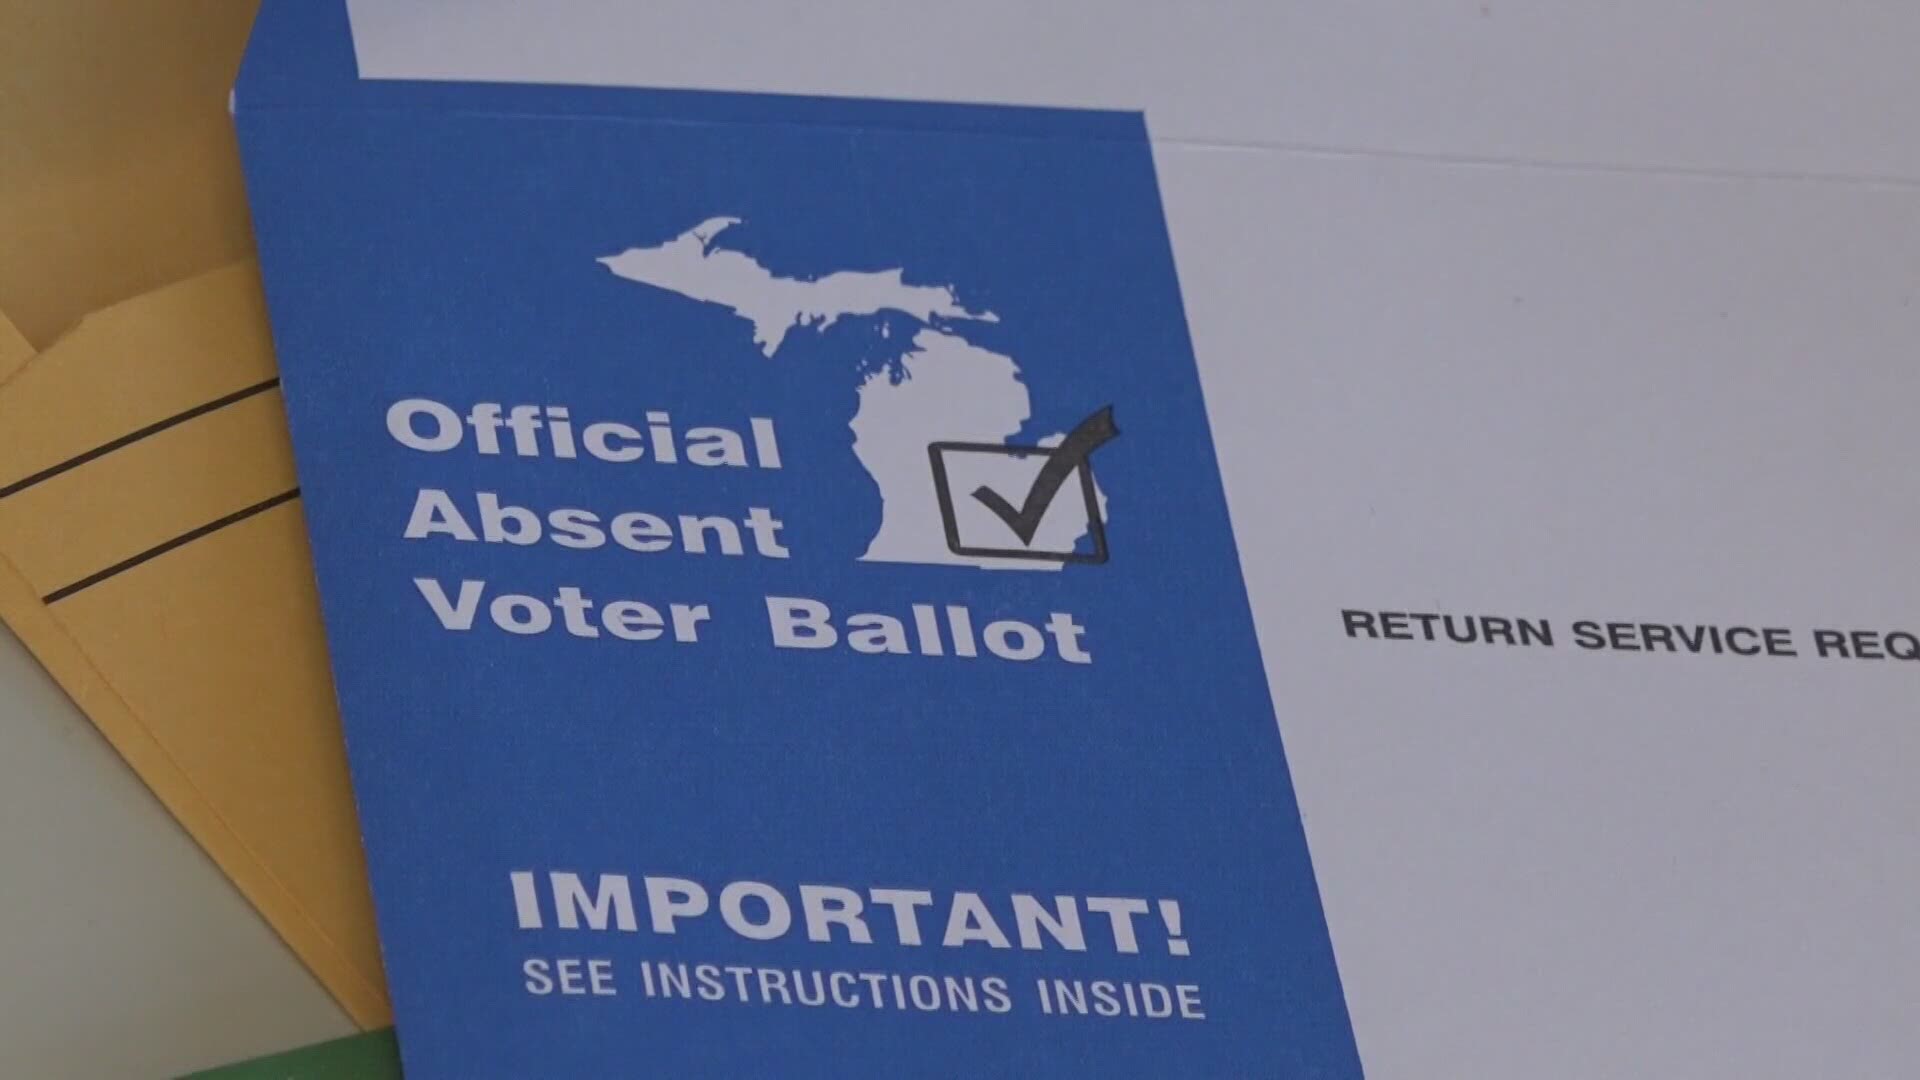 As the general election on Nov. 3rd draws near, Michigan's Secretary of State wants eligible residents to have the tools needed to vote from home.